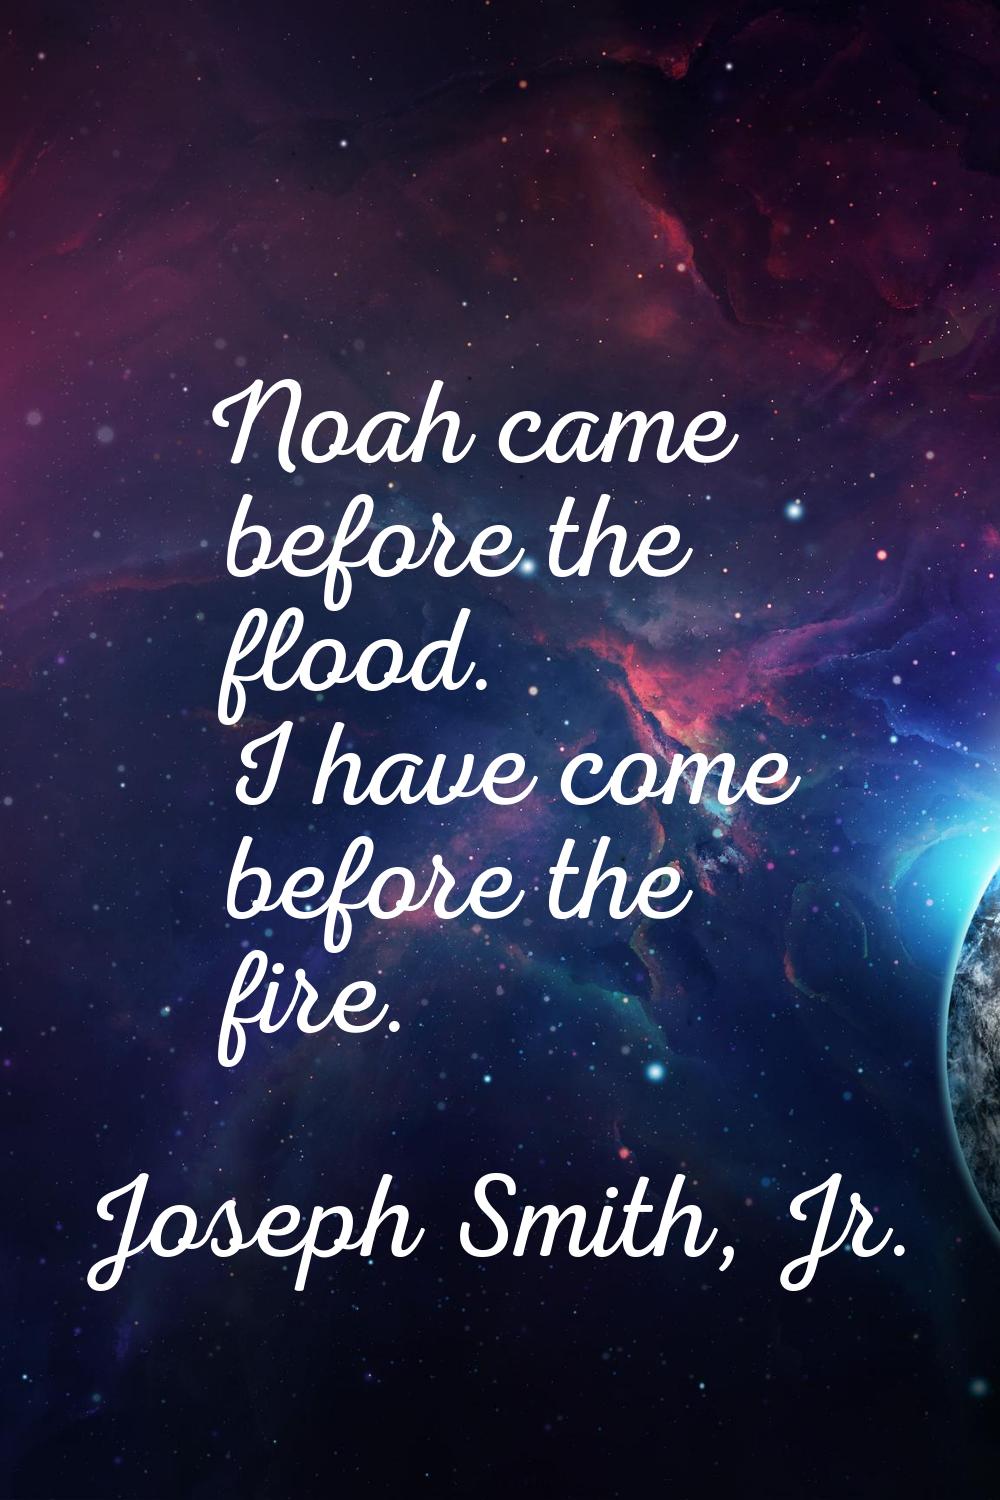 Noah came before the flood. I have come before the fire.